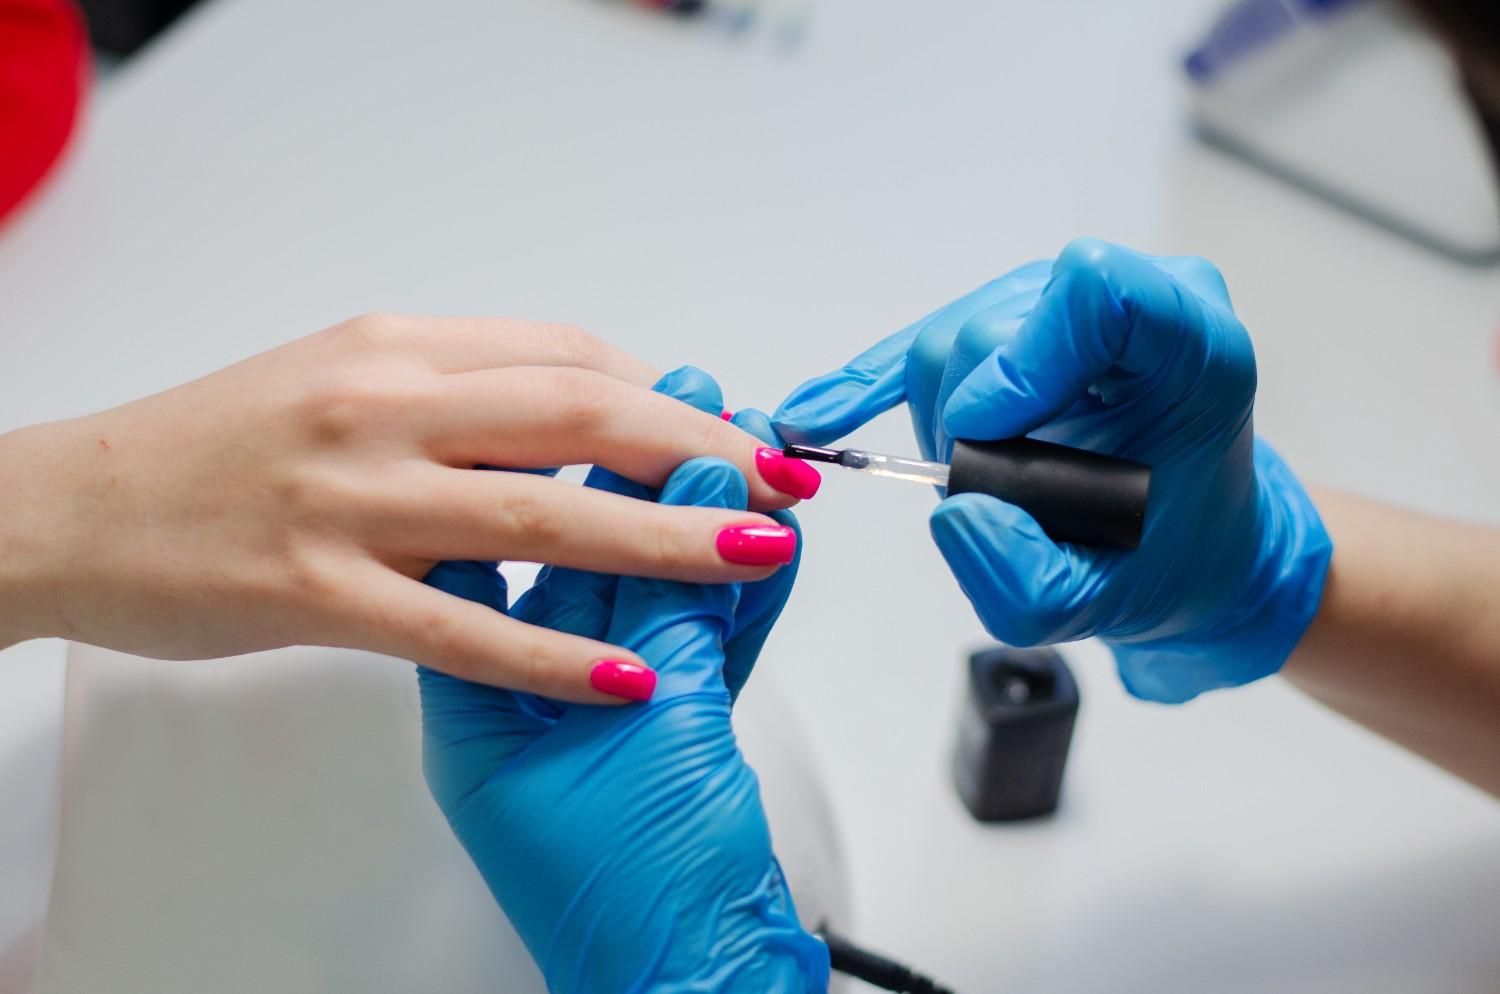 Nail salons face COVID-19 challenges after reopening - Marketplace